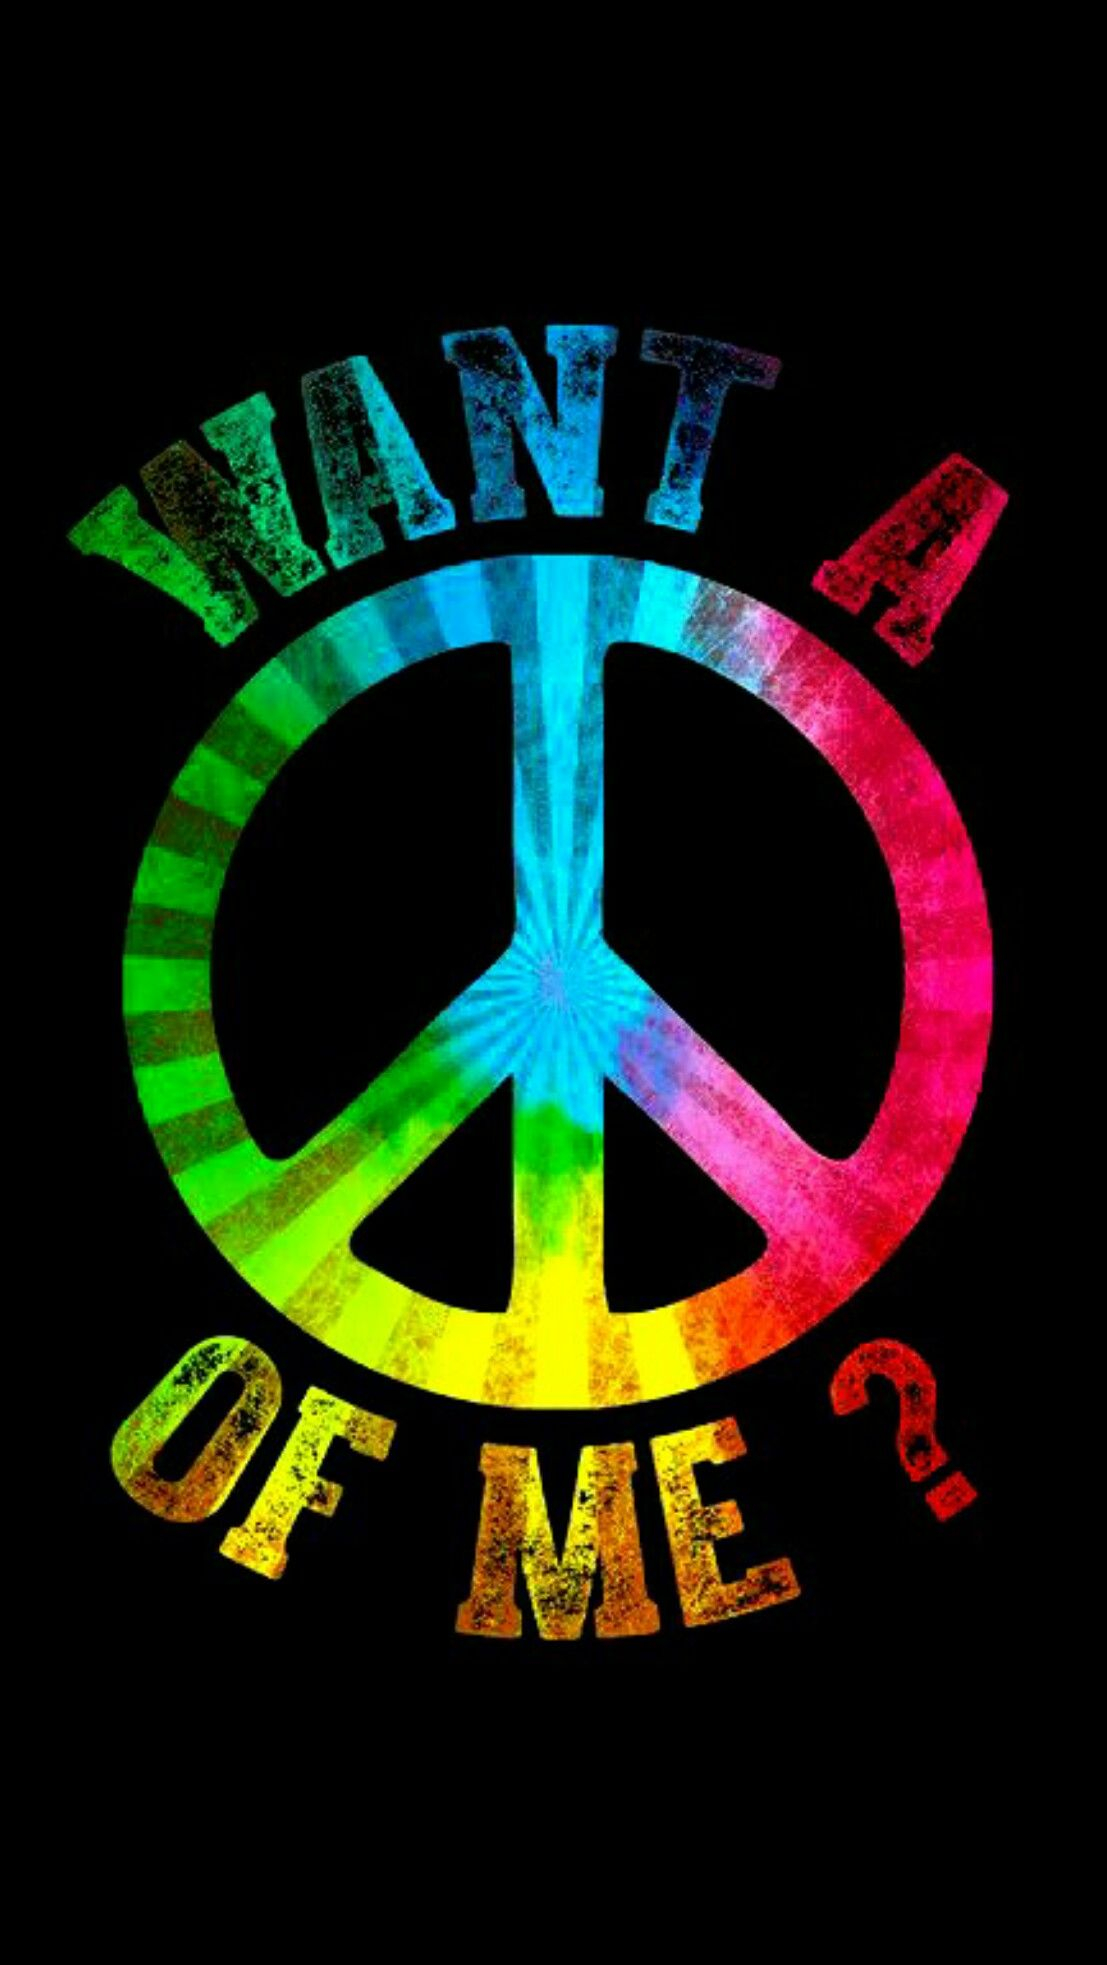 1107x1965 marines #black #wallpaper #android #iphone | Peace sign art, Peace art, Hippie peace